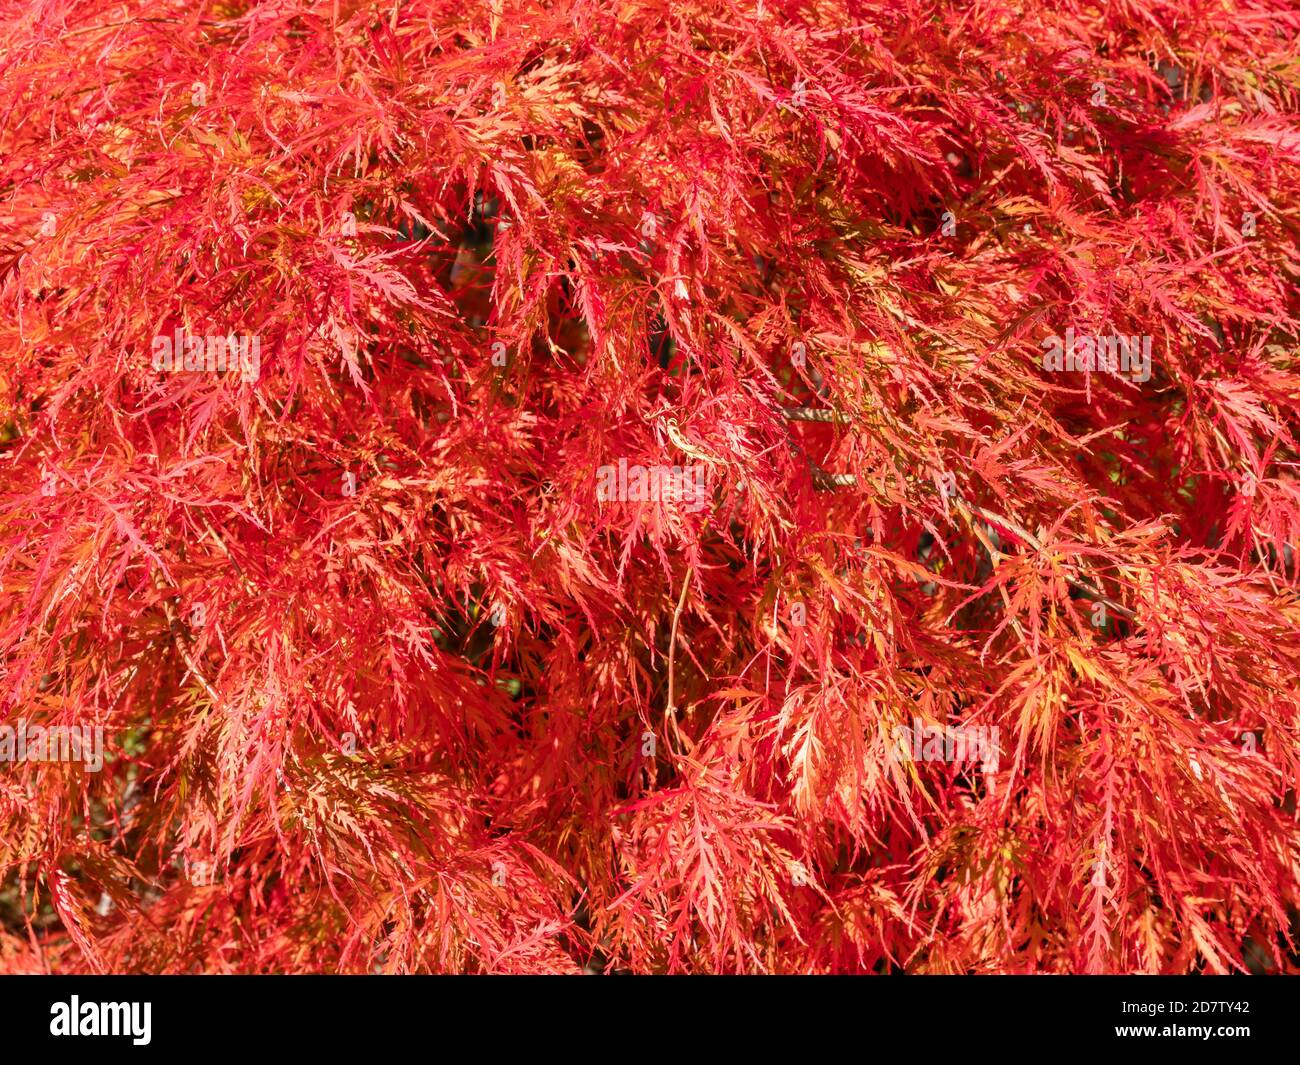 bright red leaves and fruit of a Japanese maple tree (Acer japonicum) Stock Photo